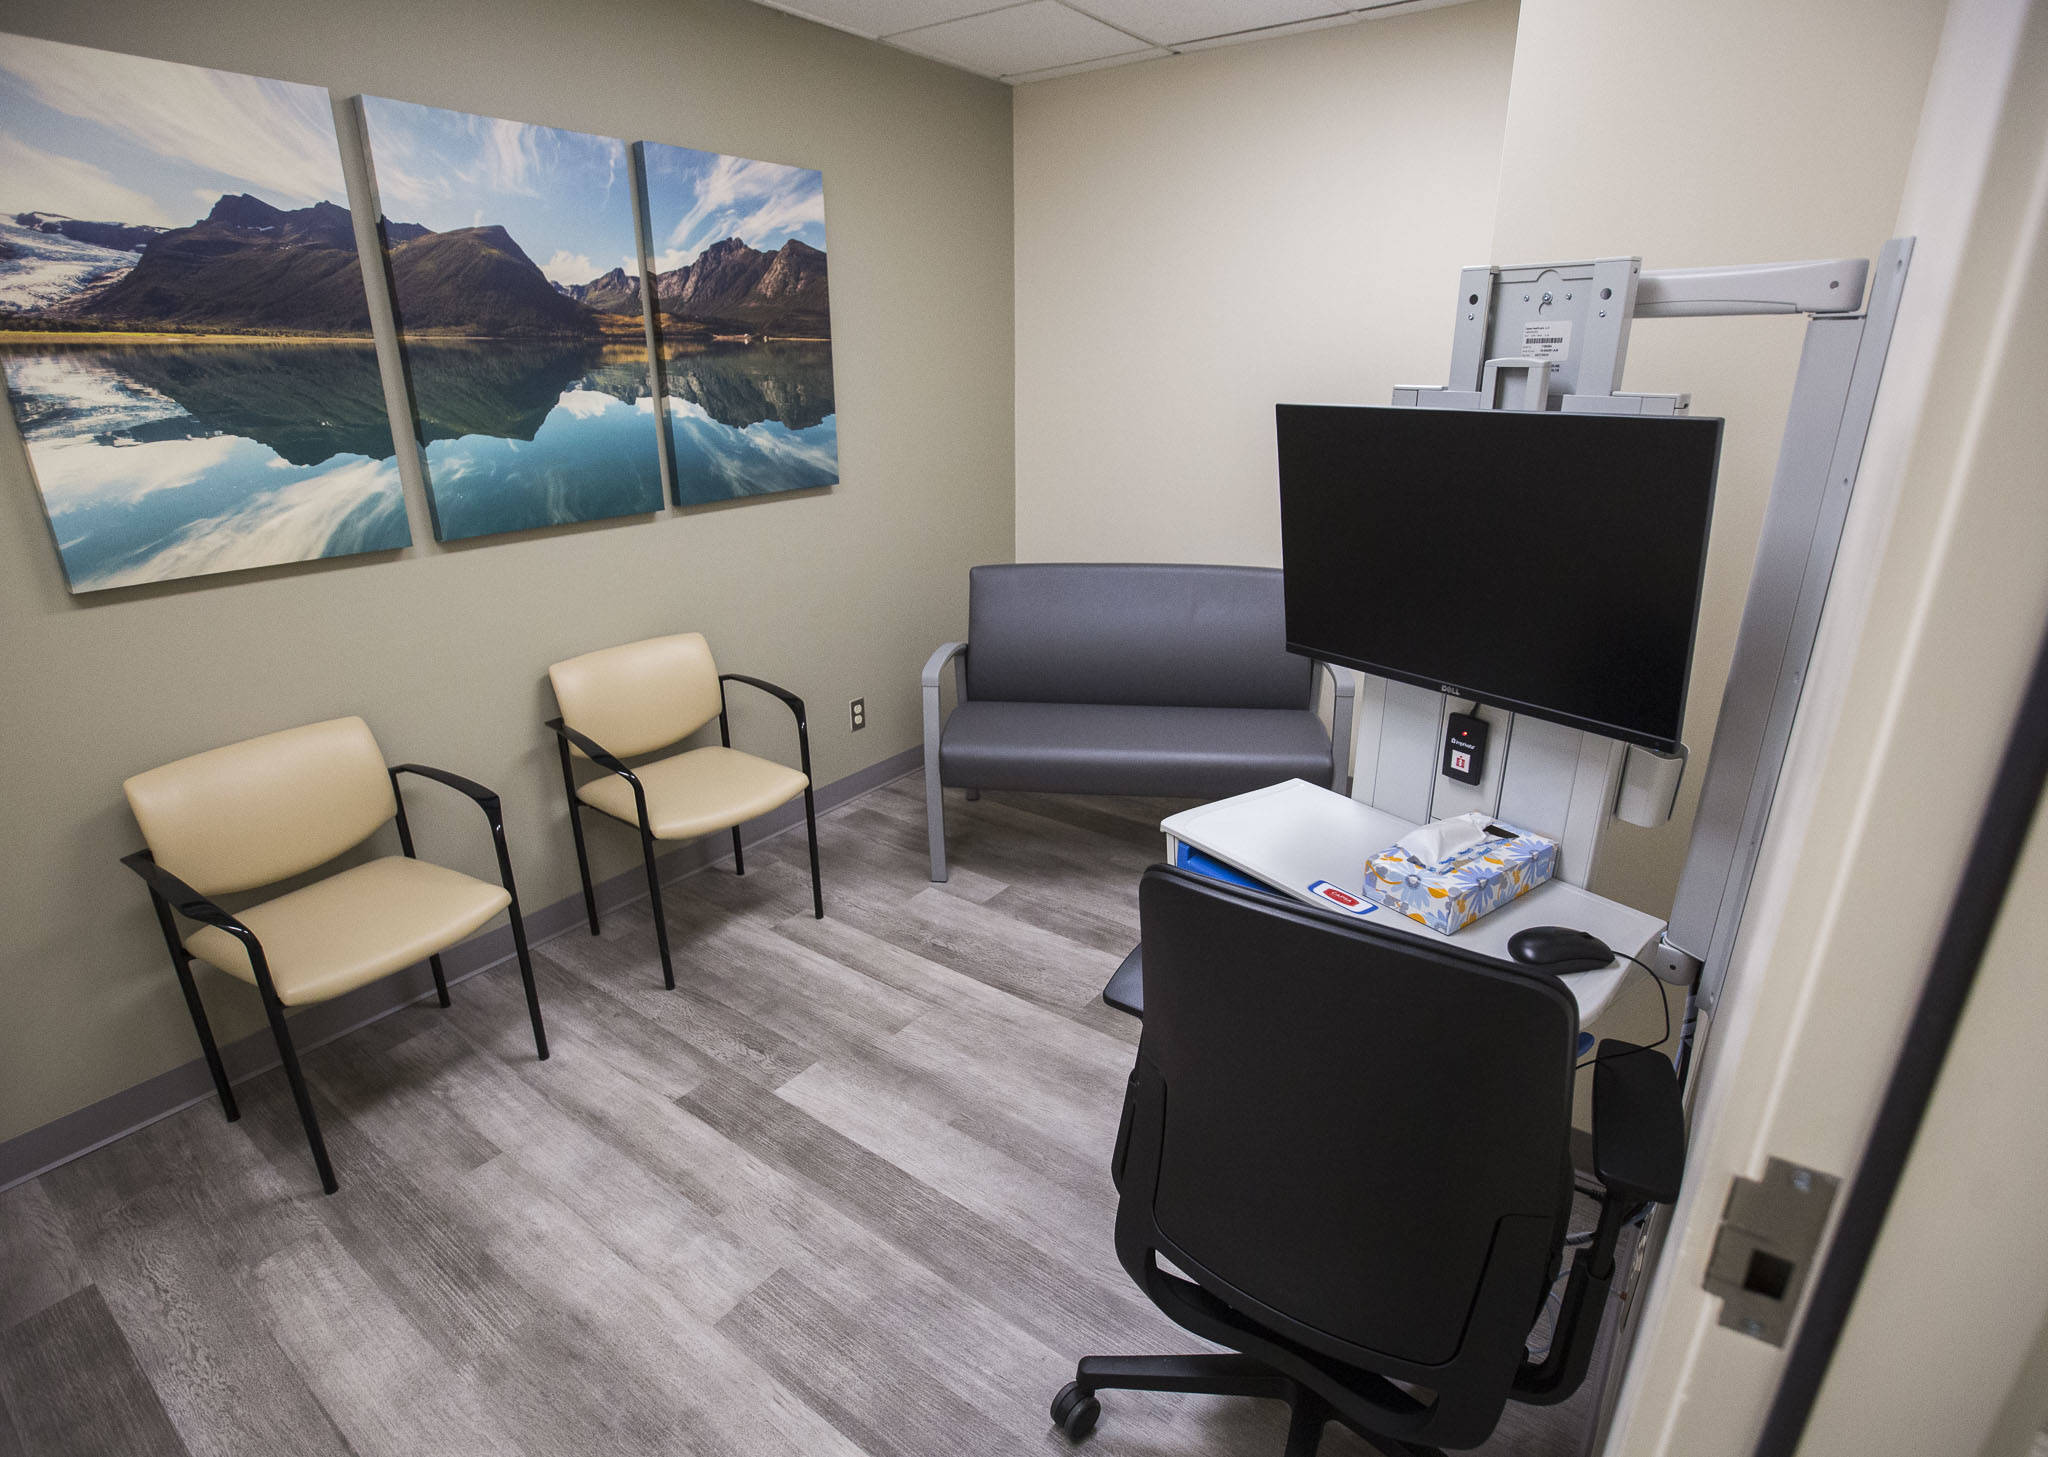 The interior of one of the four consultation rooms at Providence’s Behavioral Health Urgent Care. (Olivia Vanni / The Herald)